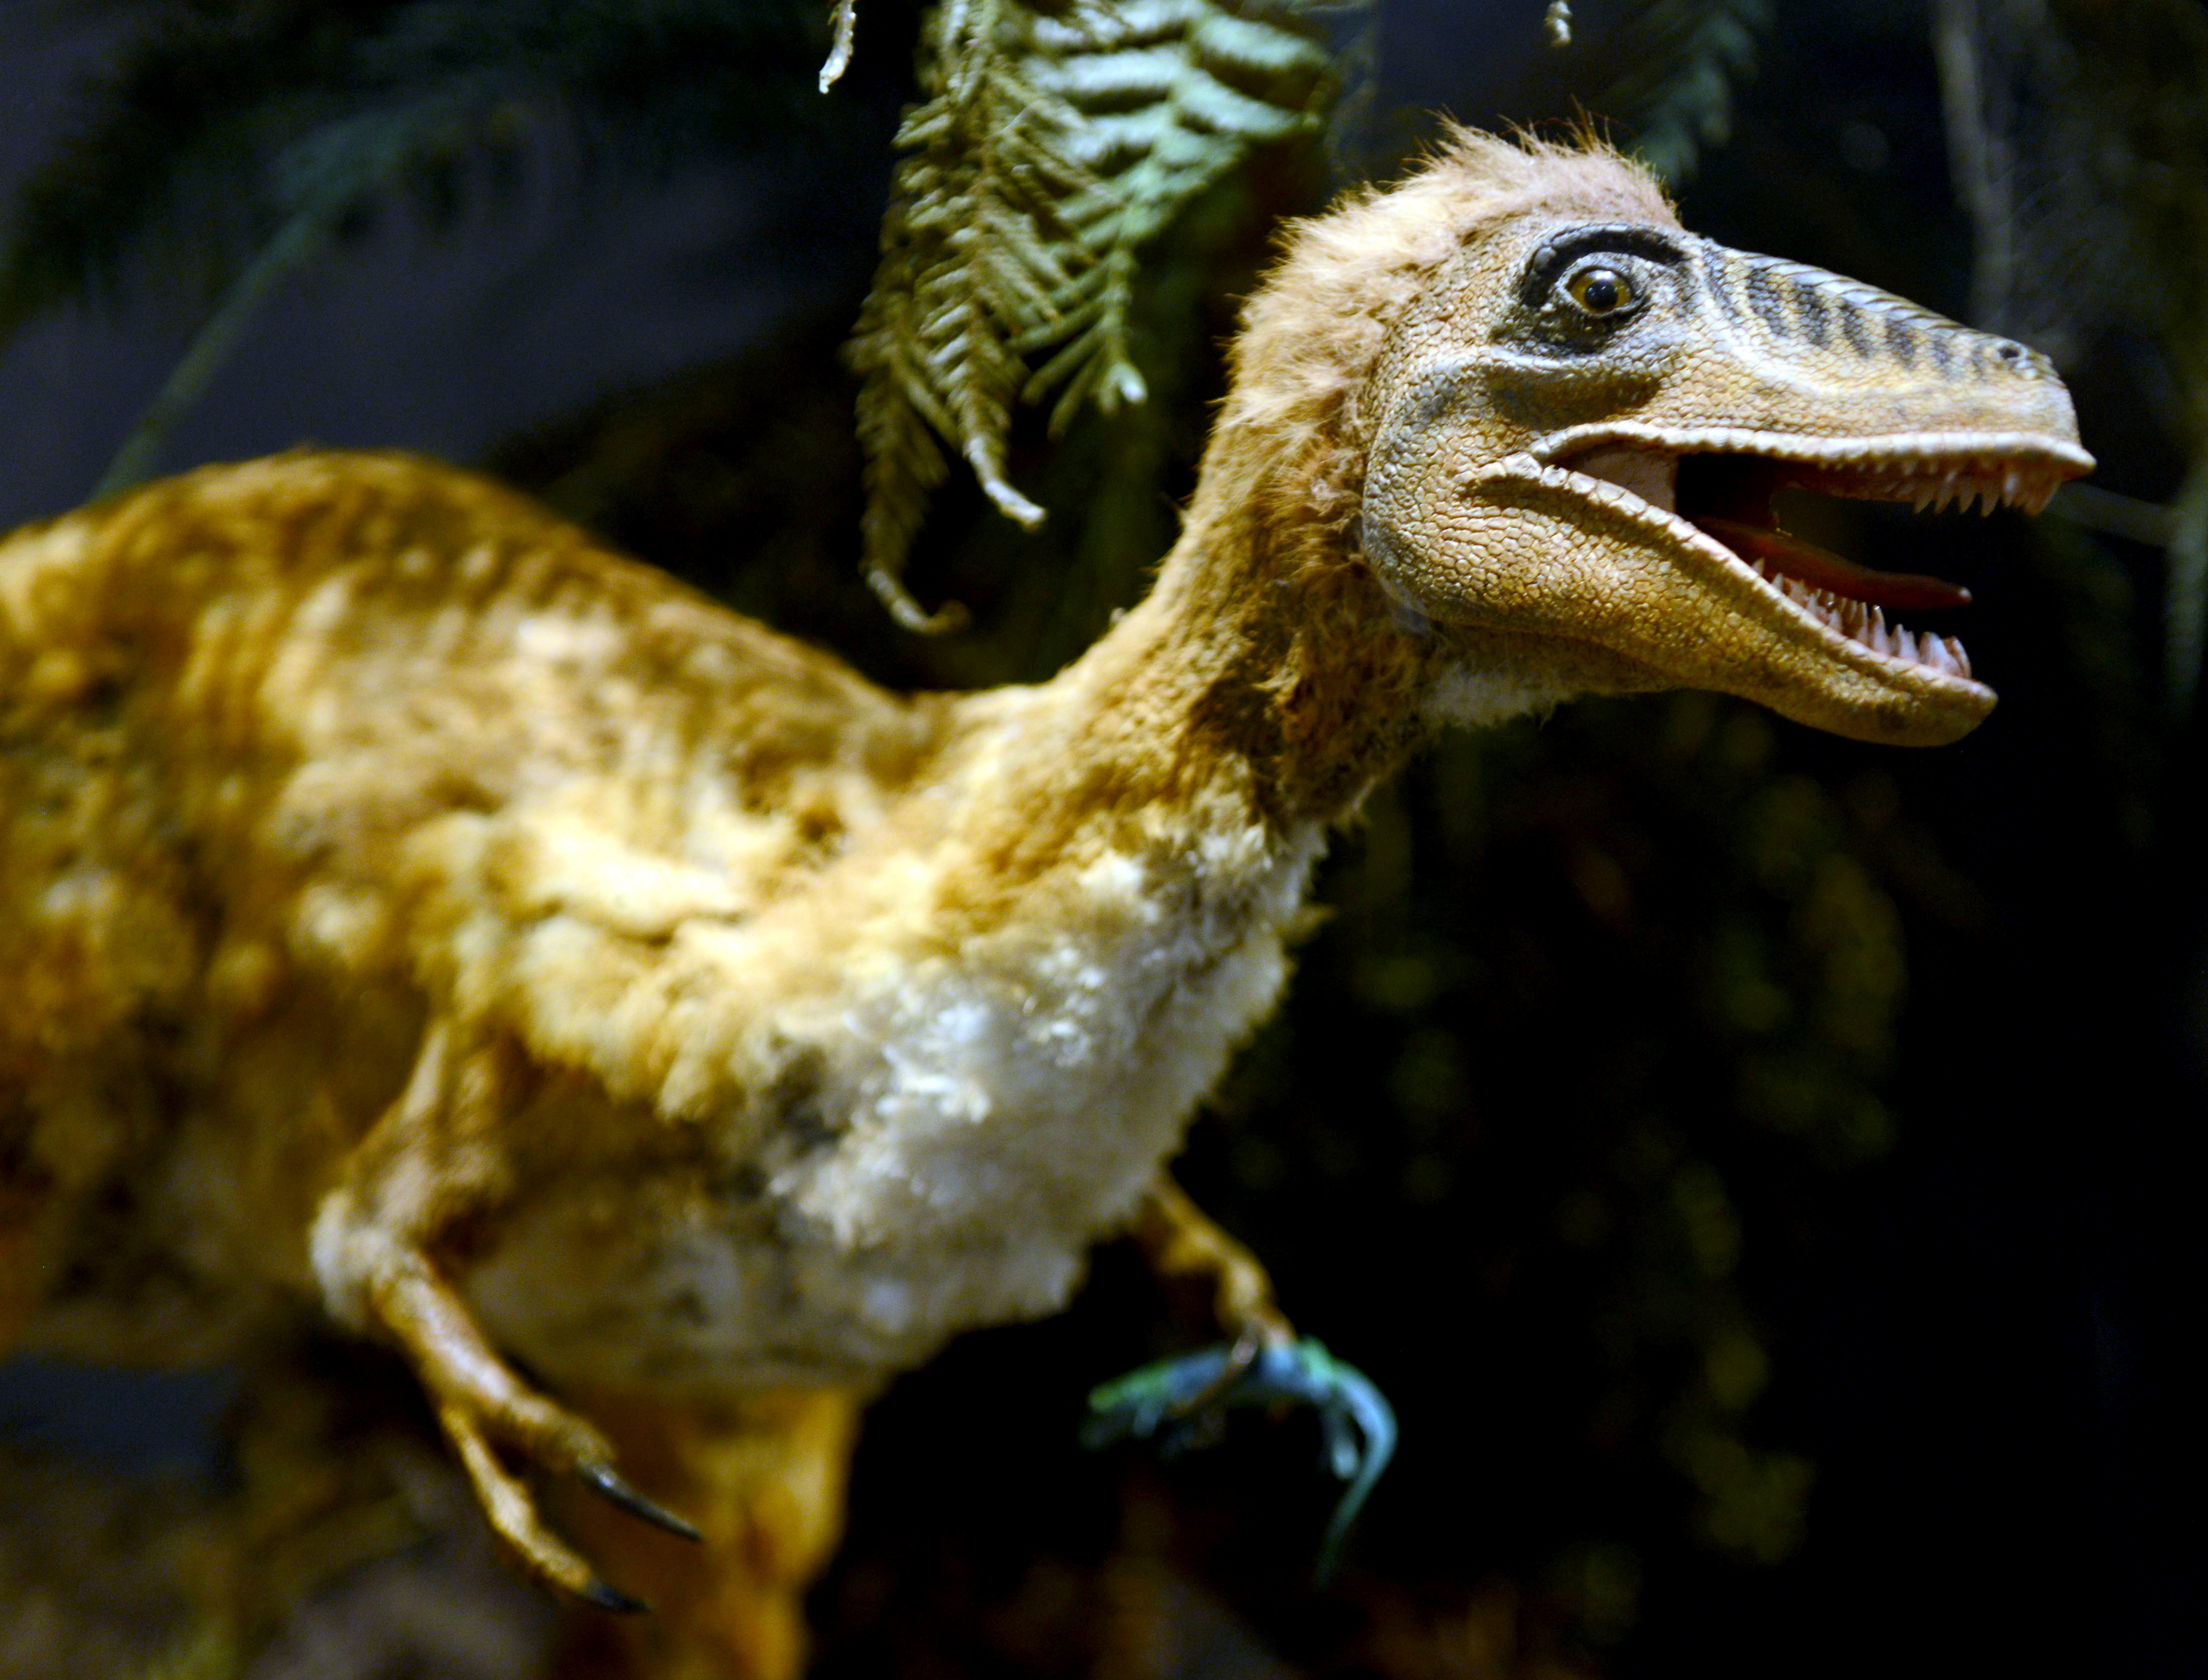 A model of an Sinosauropteryx prima in the exhibition "Dinosaurs" at the LWL Natural History Museum in Muenster, Germany, 25 September 2014. (Caroline Seidel/picture-alliance/dpa/AP)